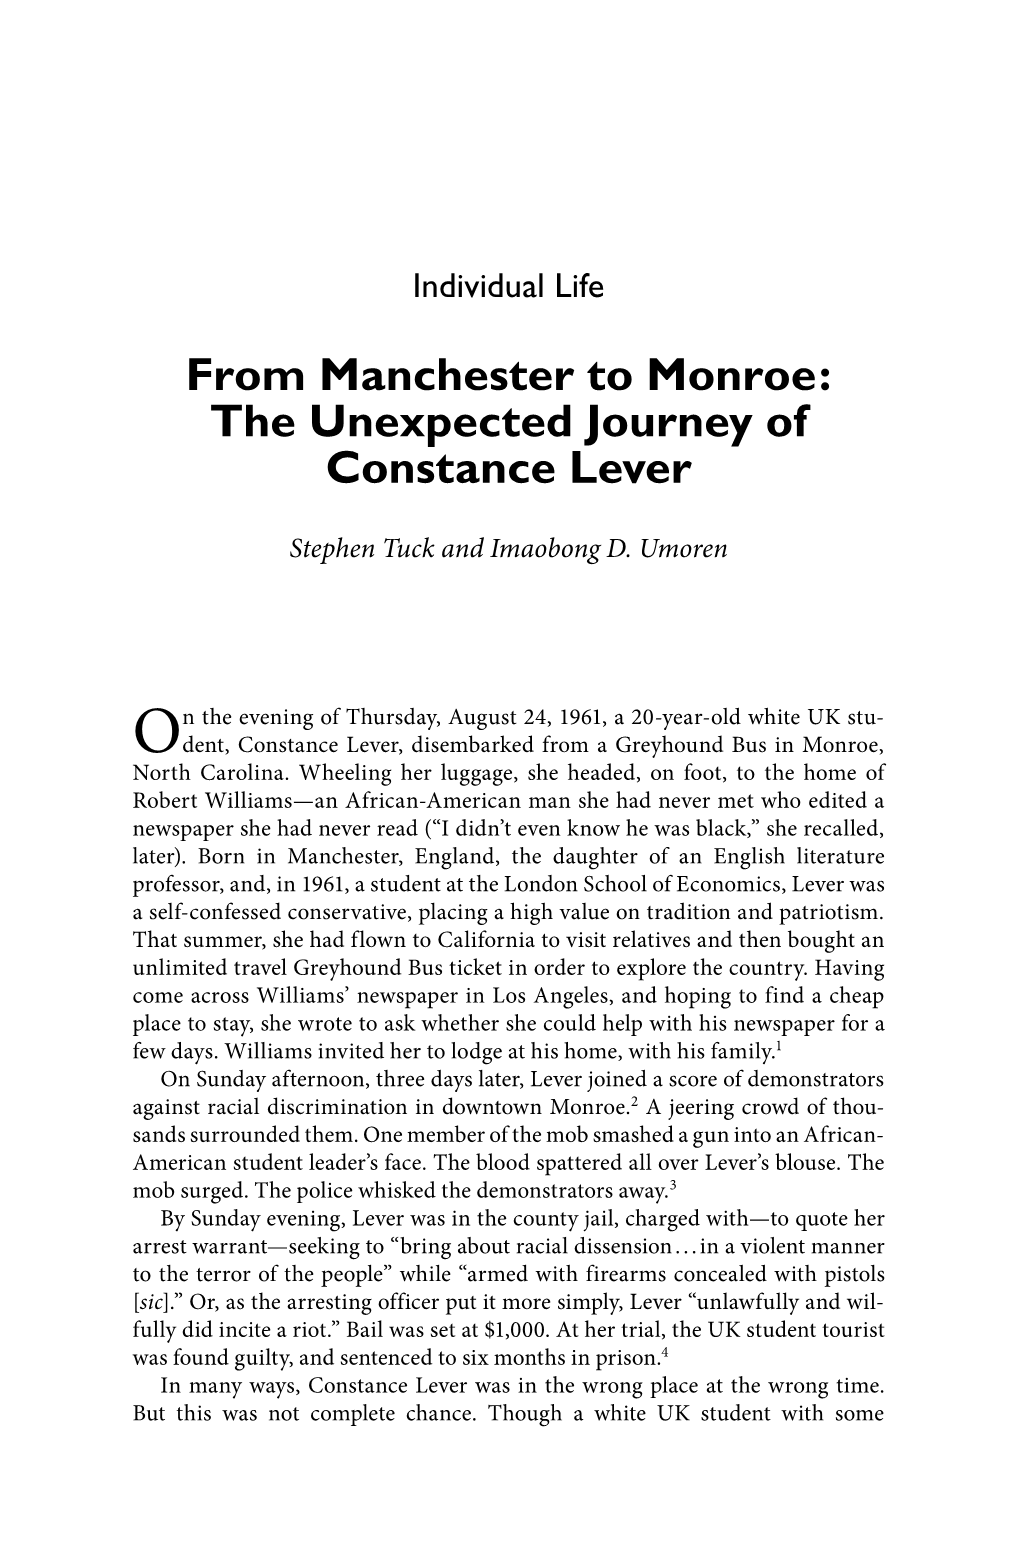 From Manchester to Monroe: the Unexpected Journey of Constance Lever